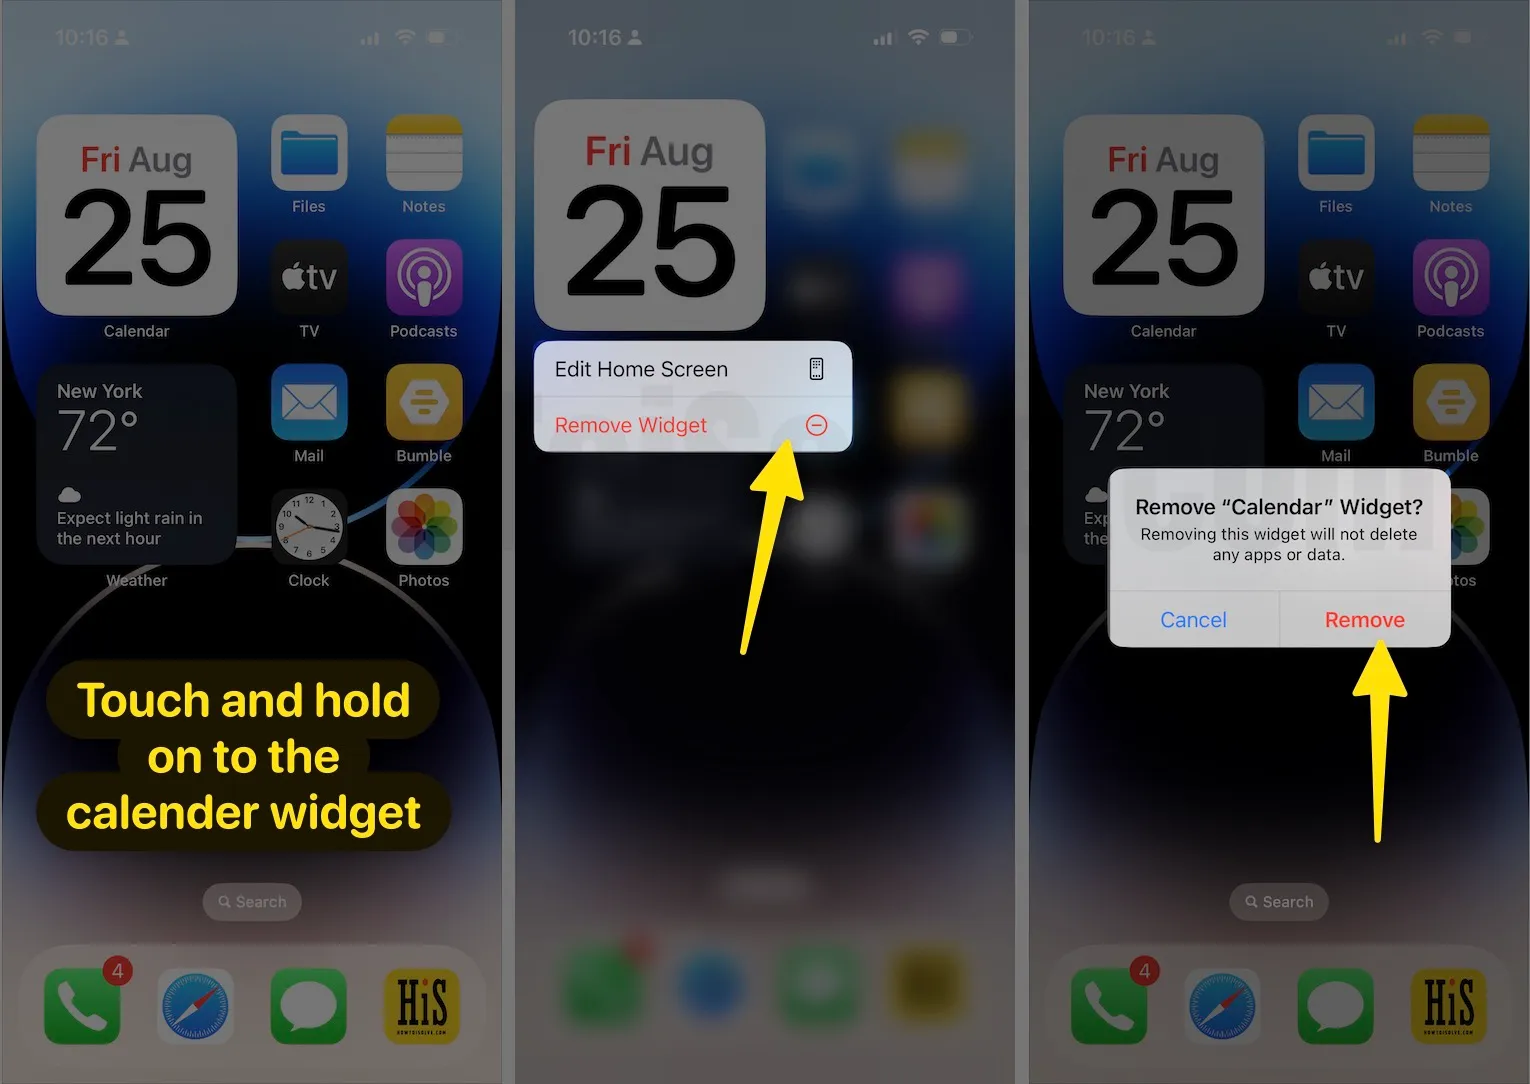 How to Remove Calendar Widget from iPhone Home Screen